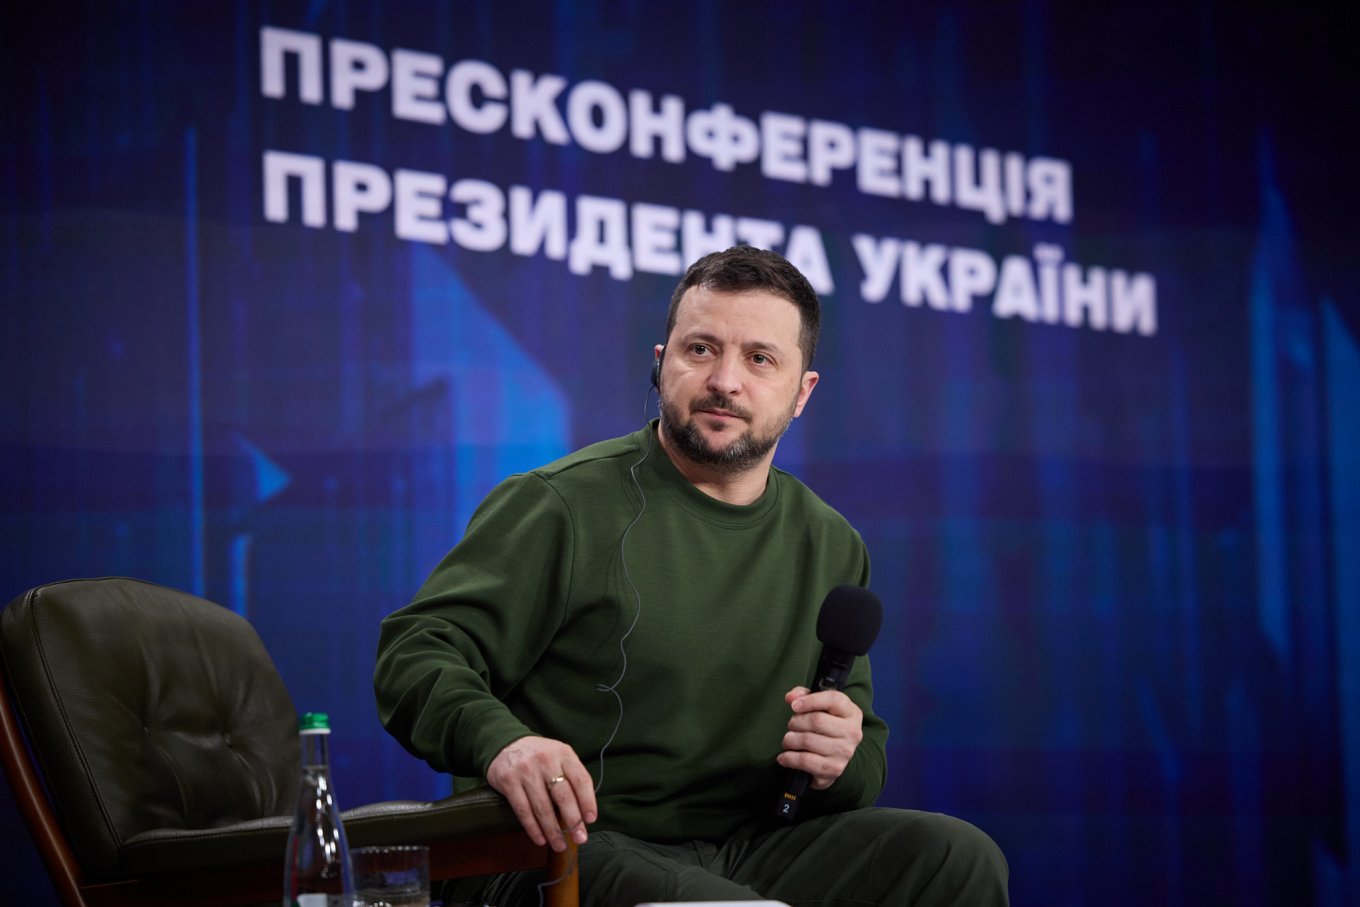 President of Ukraine Volodymyr Zelenskyi during the during a press conference at the 